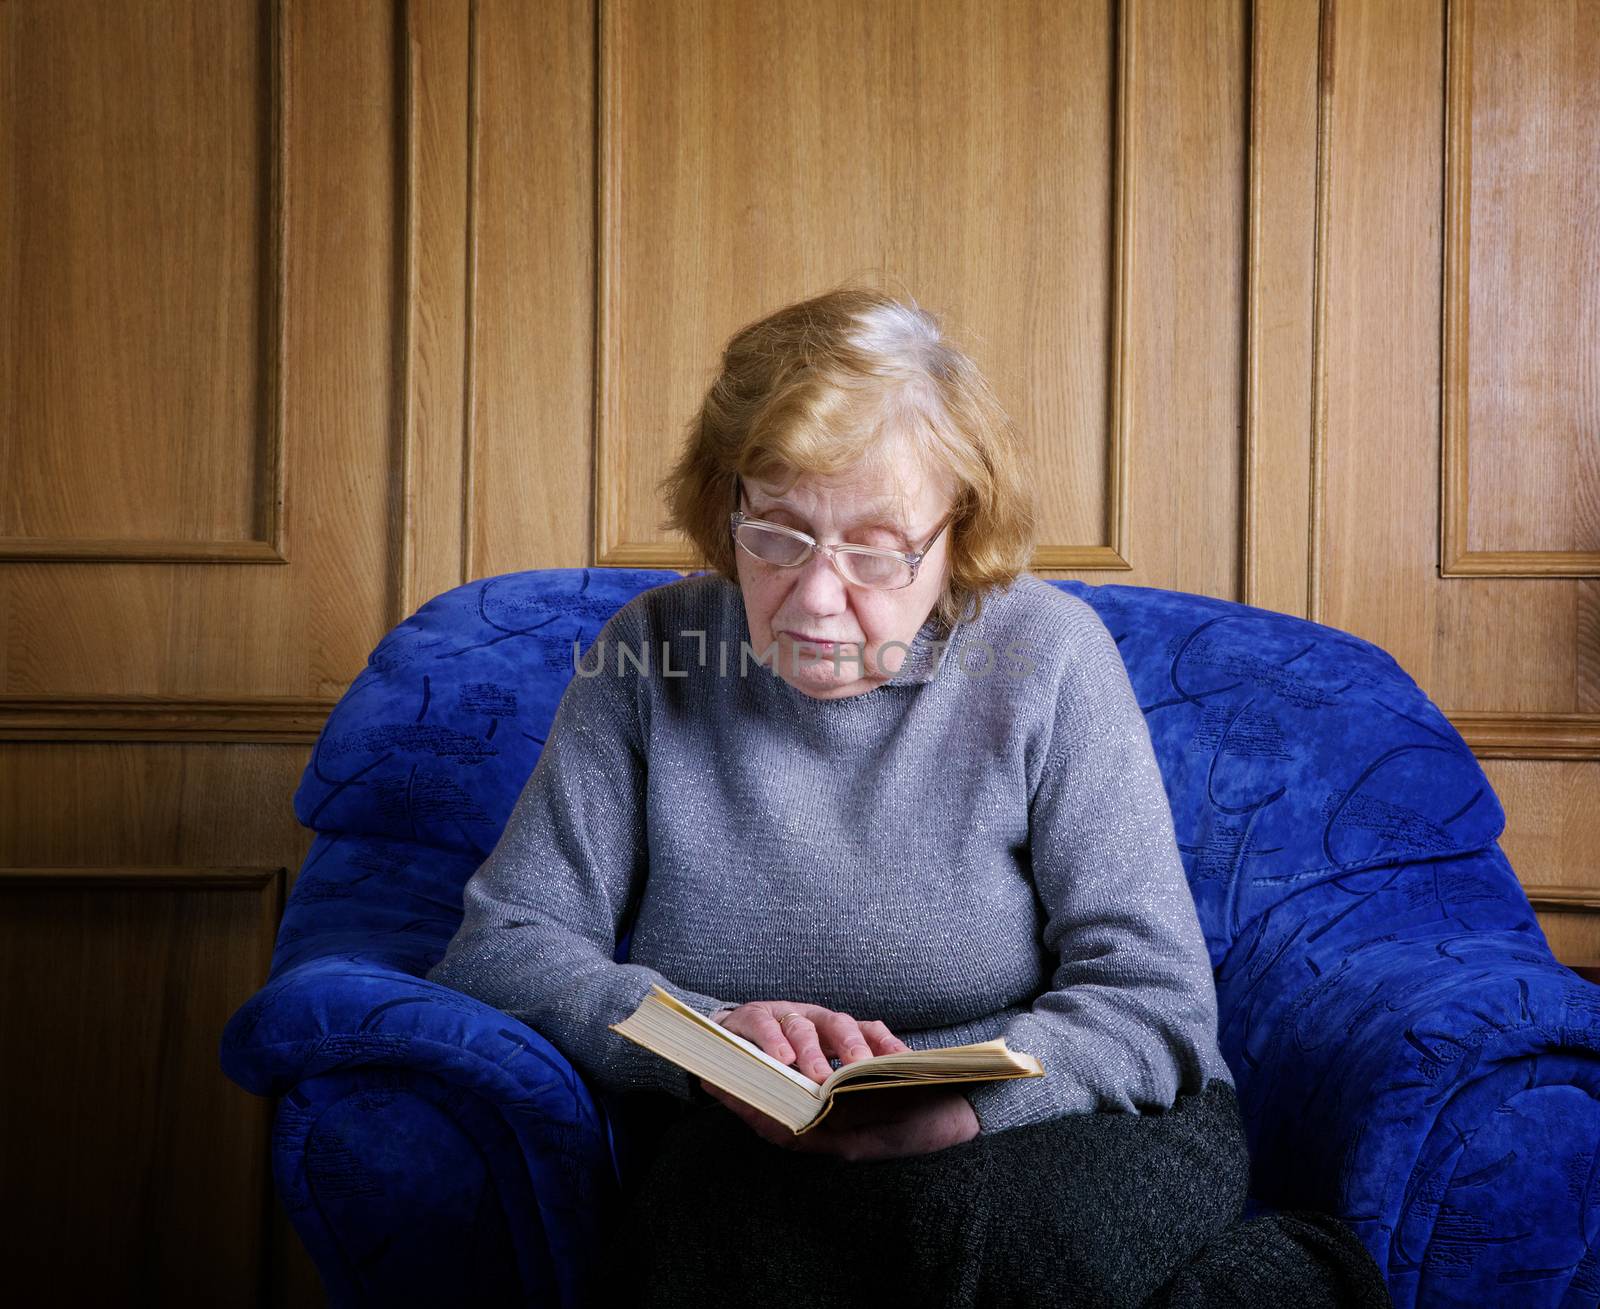 The old woman sits in an armchair and reads the book by alarich